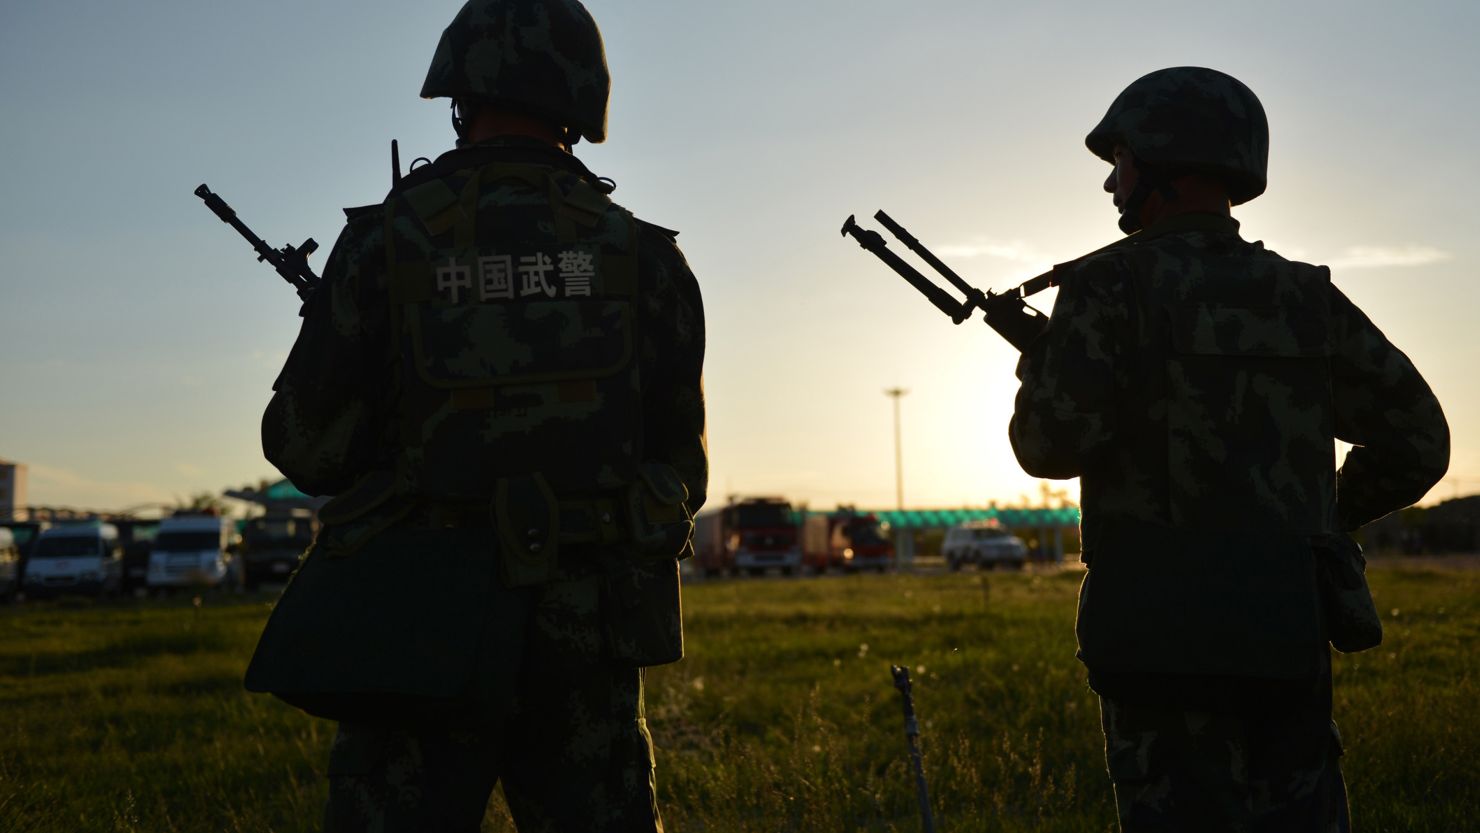 File: Anti-terrorism police attend an exercise in China's Xinjiang region in 2013.